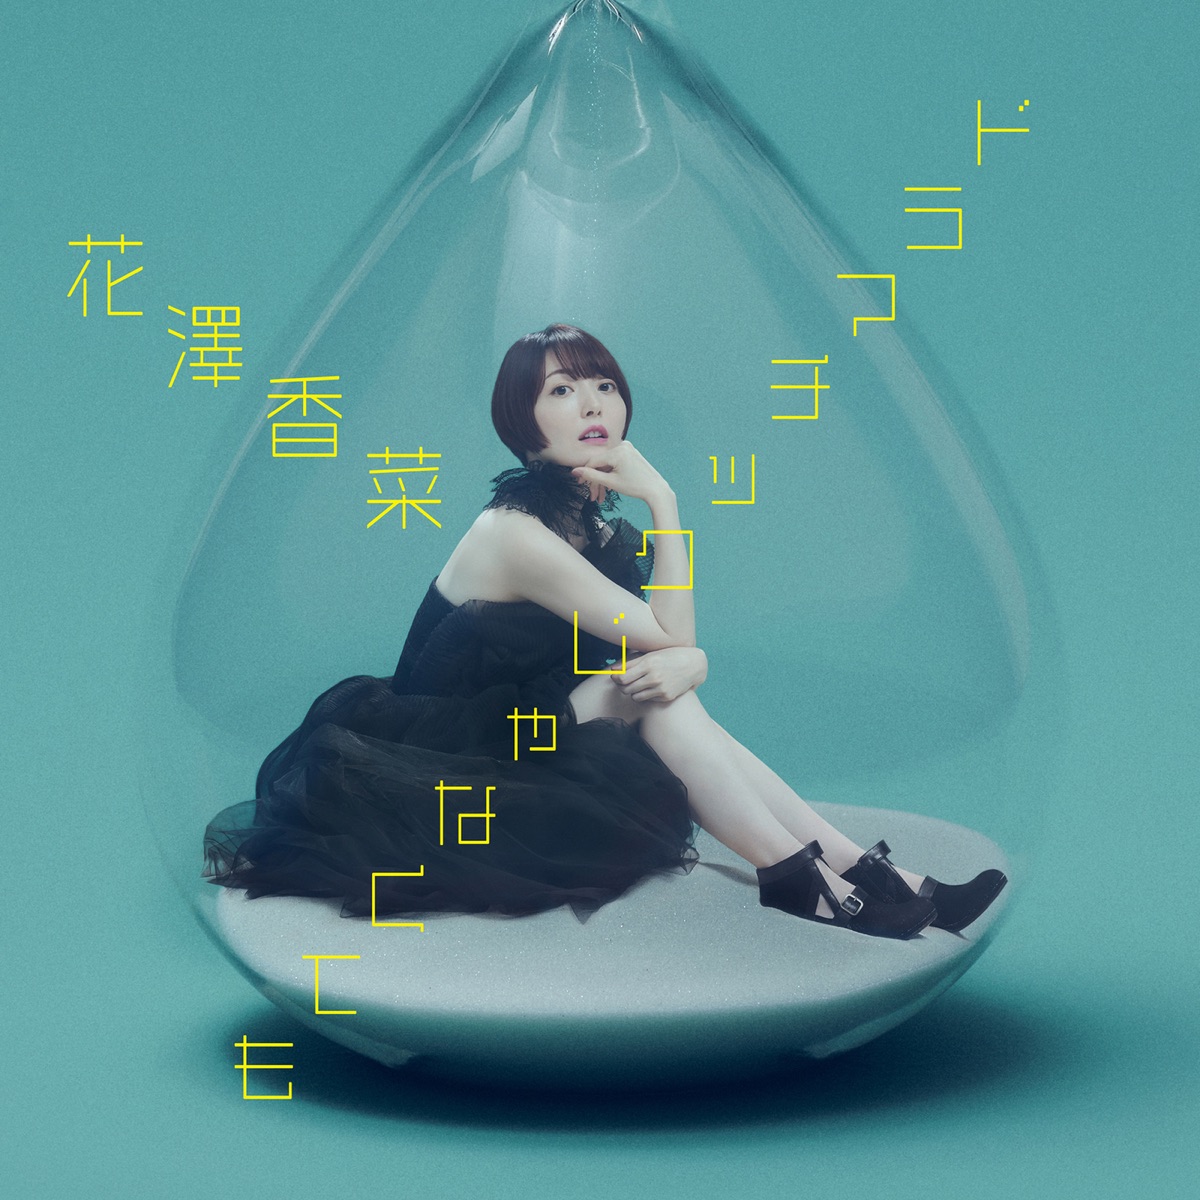 Cover art for『Kana Hanazawa - ドラマチックじゃなくても』from the release『Not as Dramatic As...